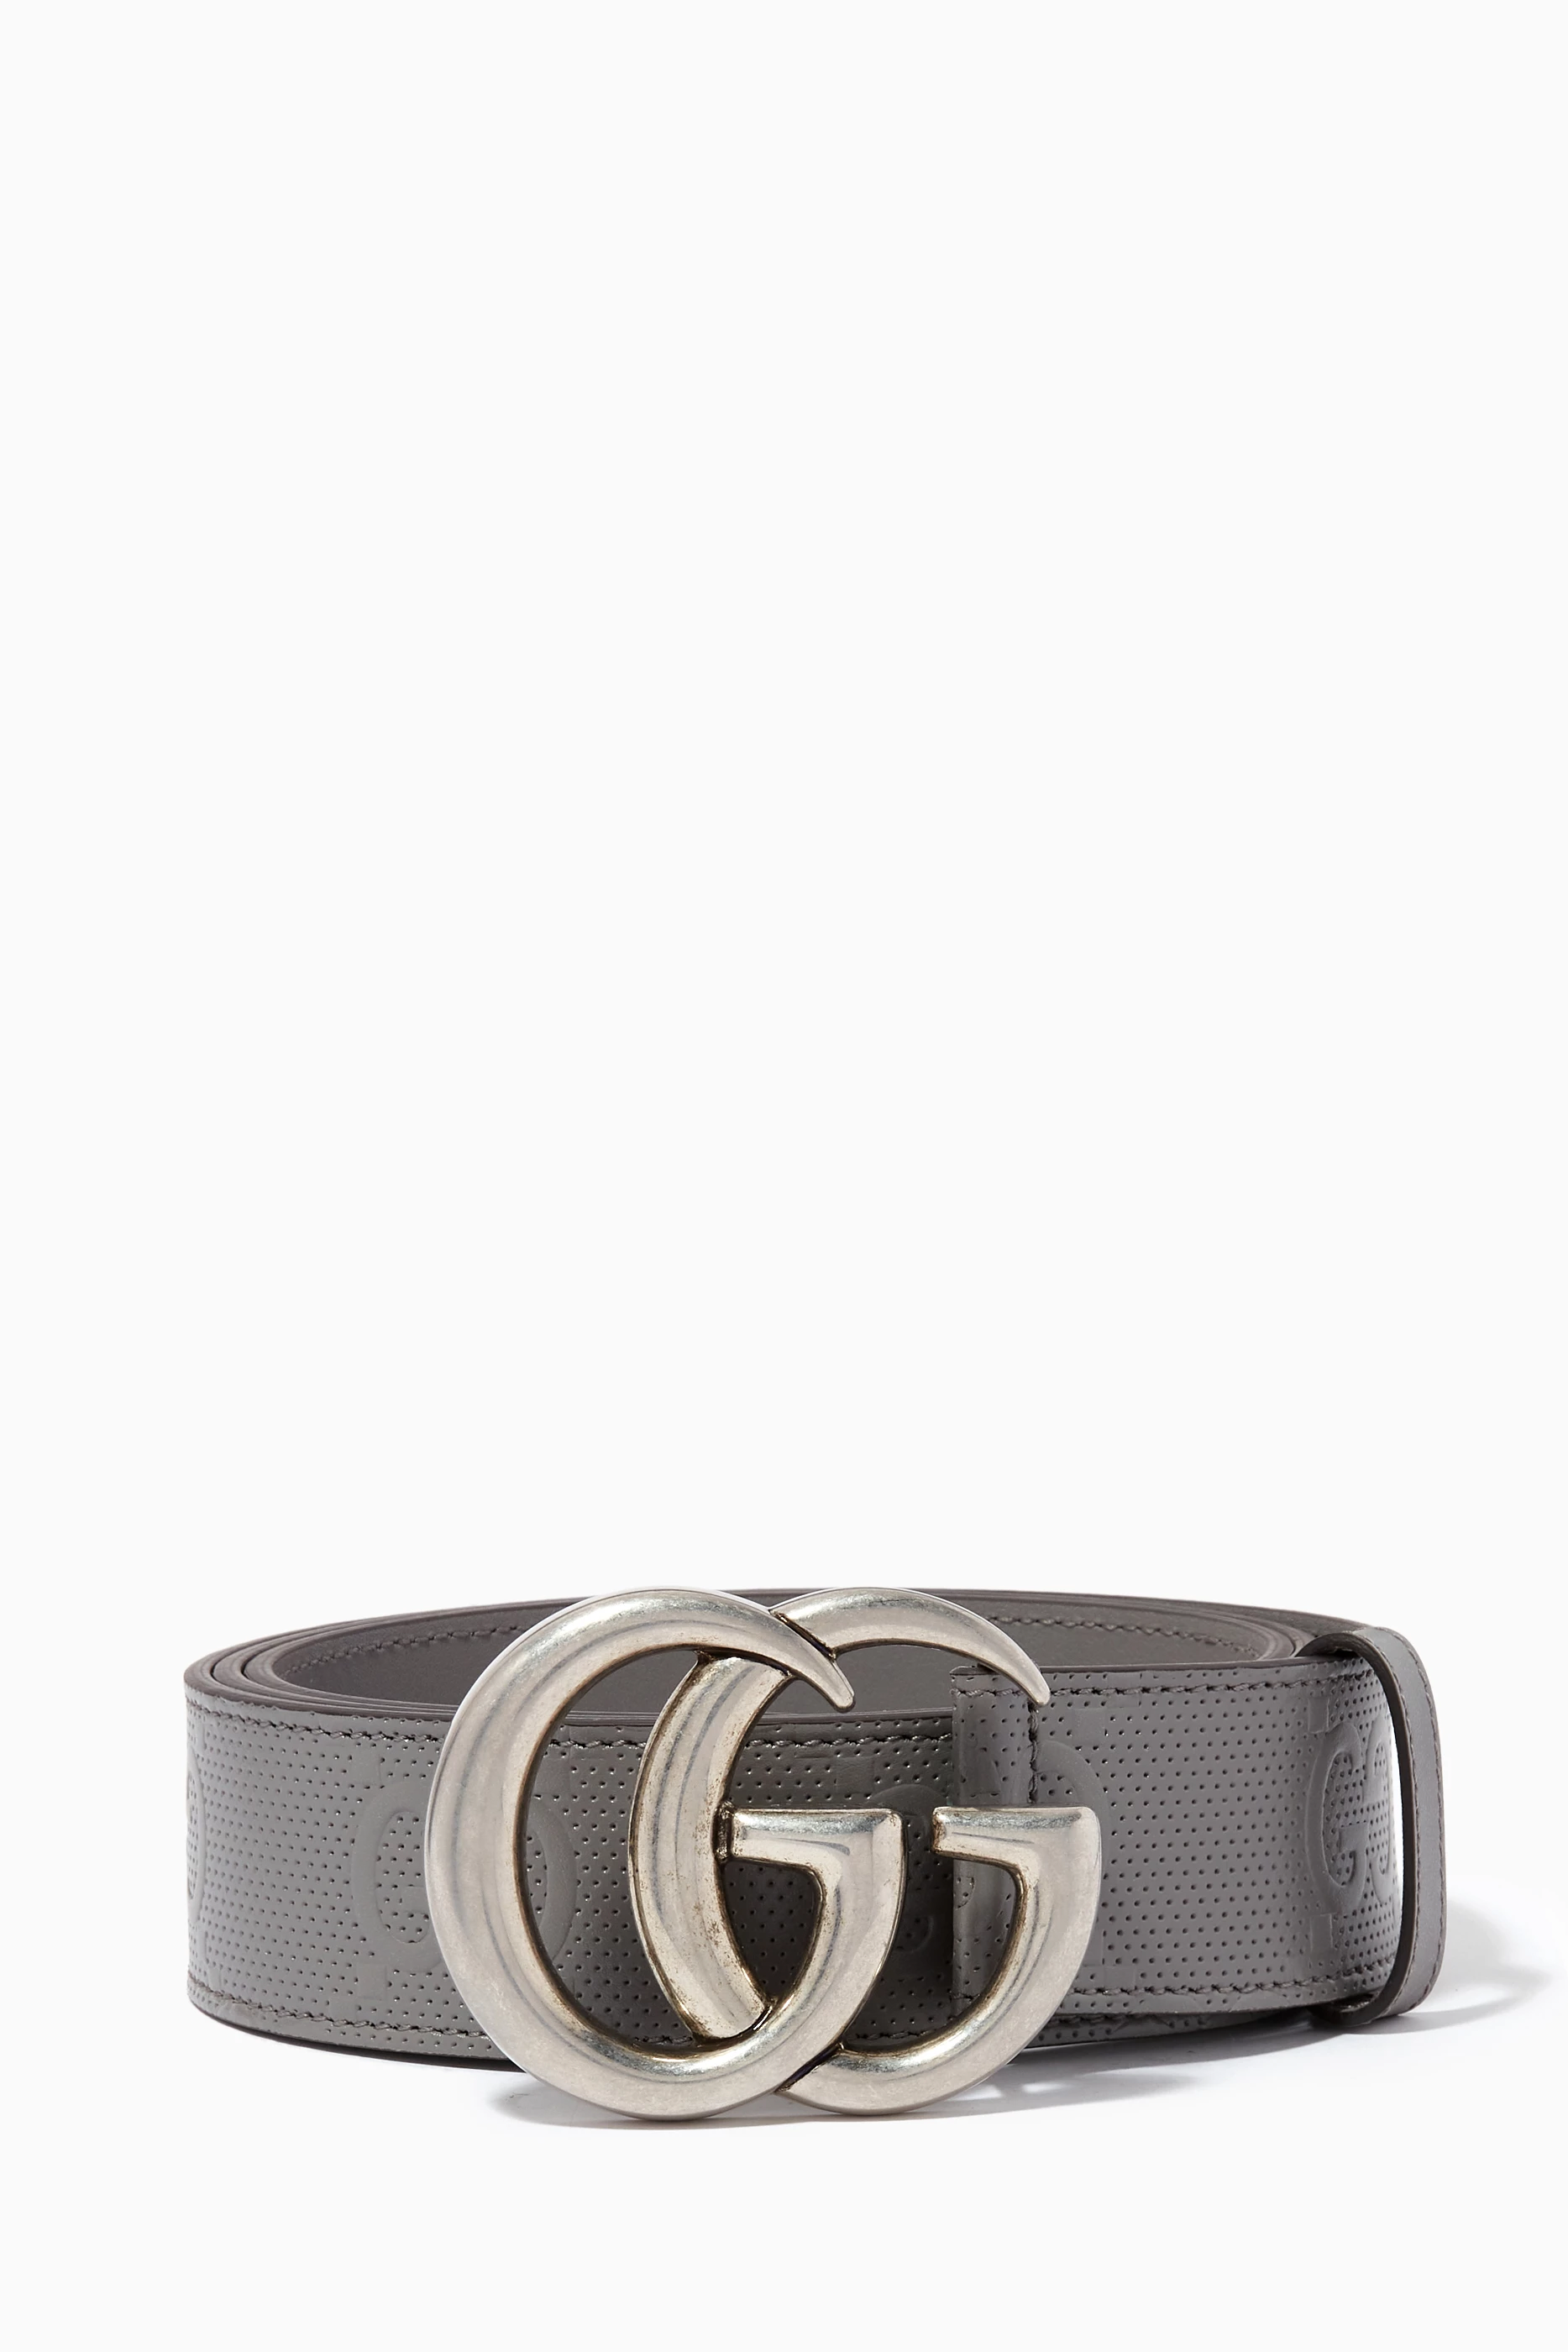 Shop Gucci Grey GG Marmont Embossed Belt in Leather for MEN | Ounass Kuwait